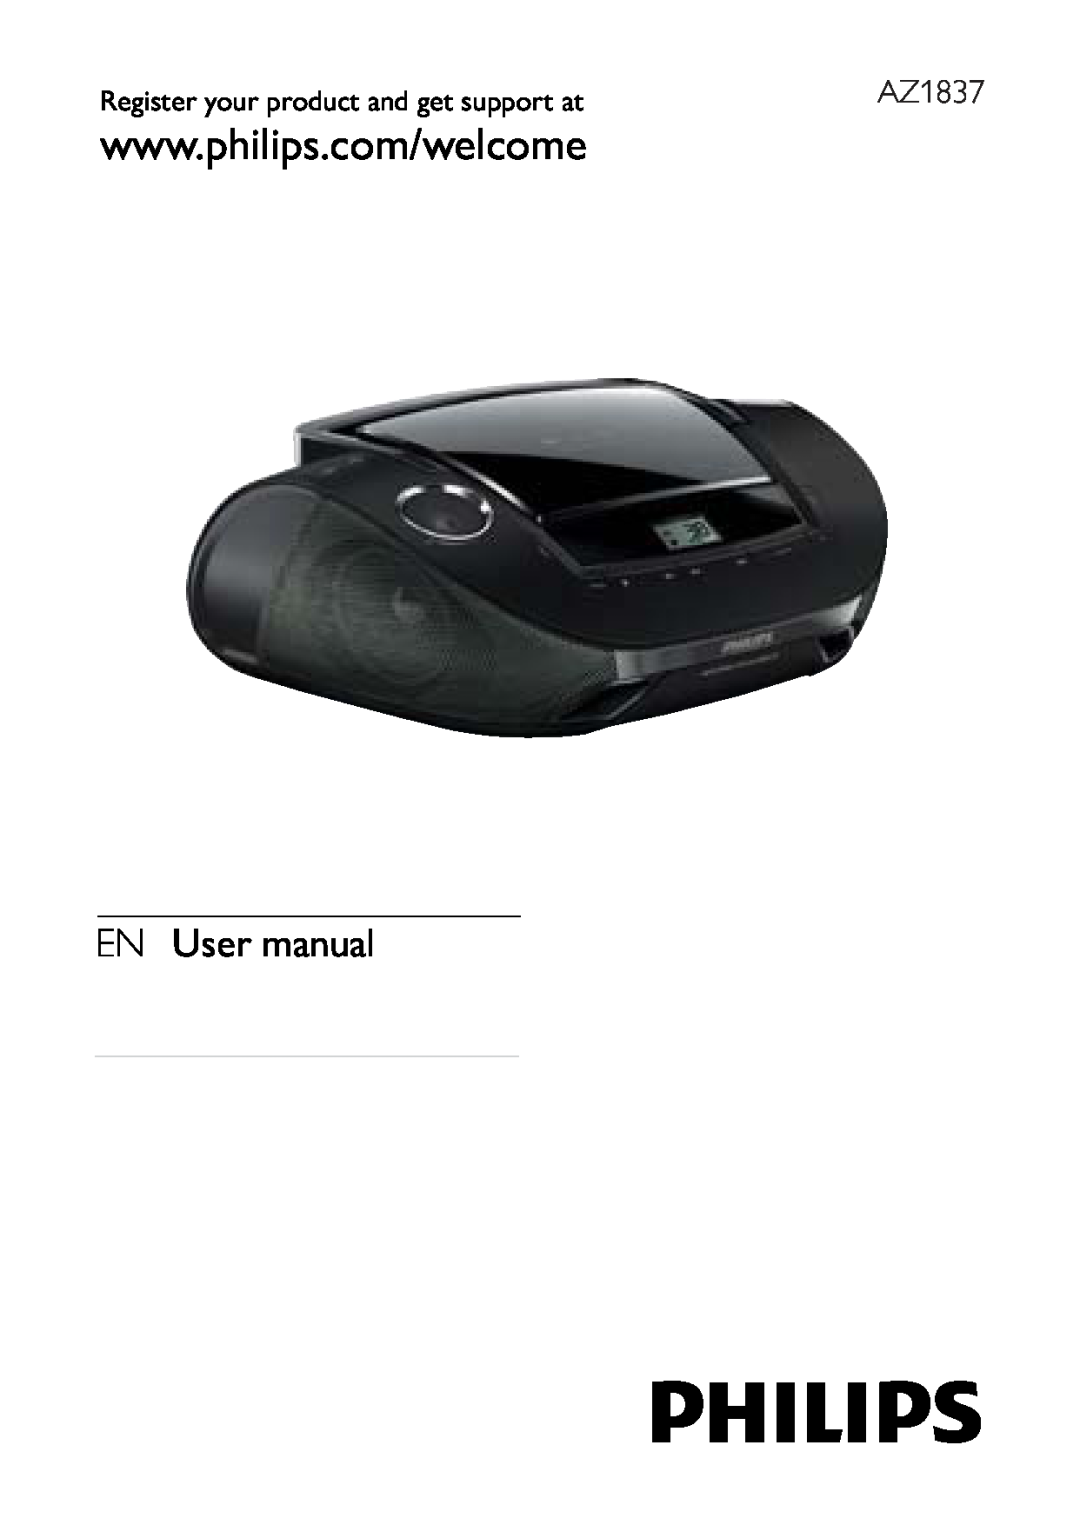 Philips AZ1837 user manual Register your product and get support at 